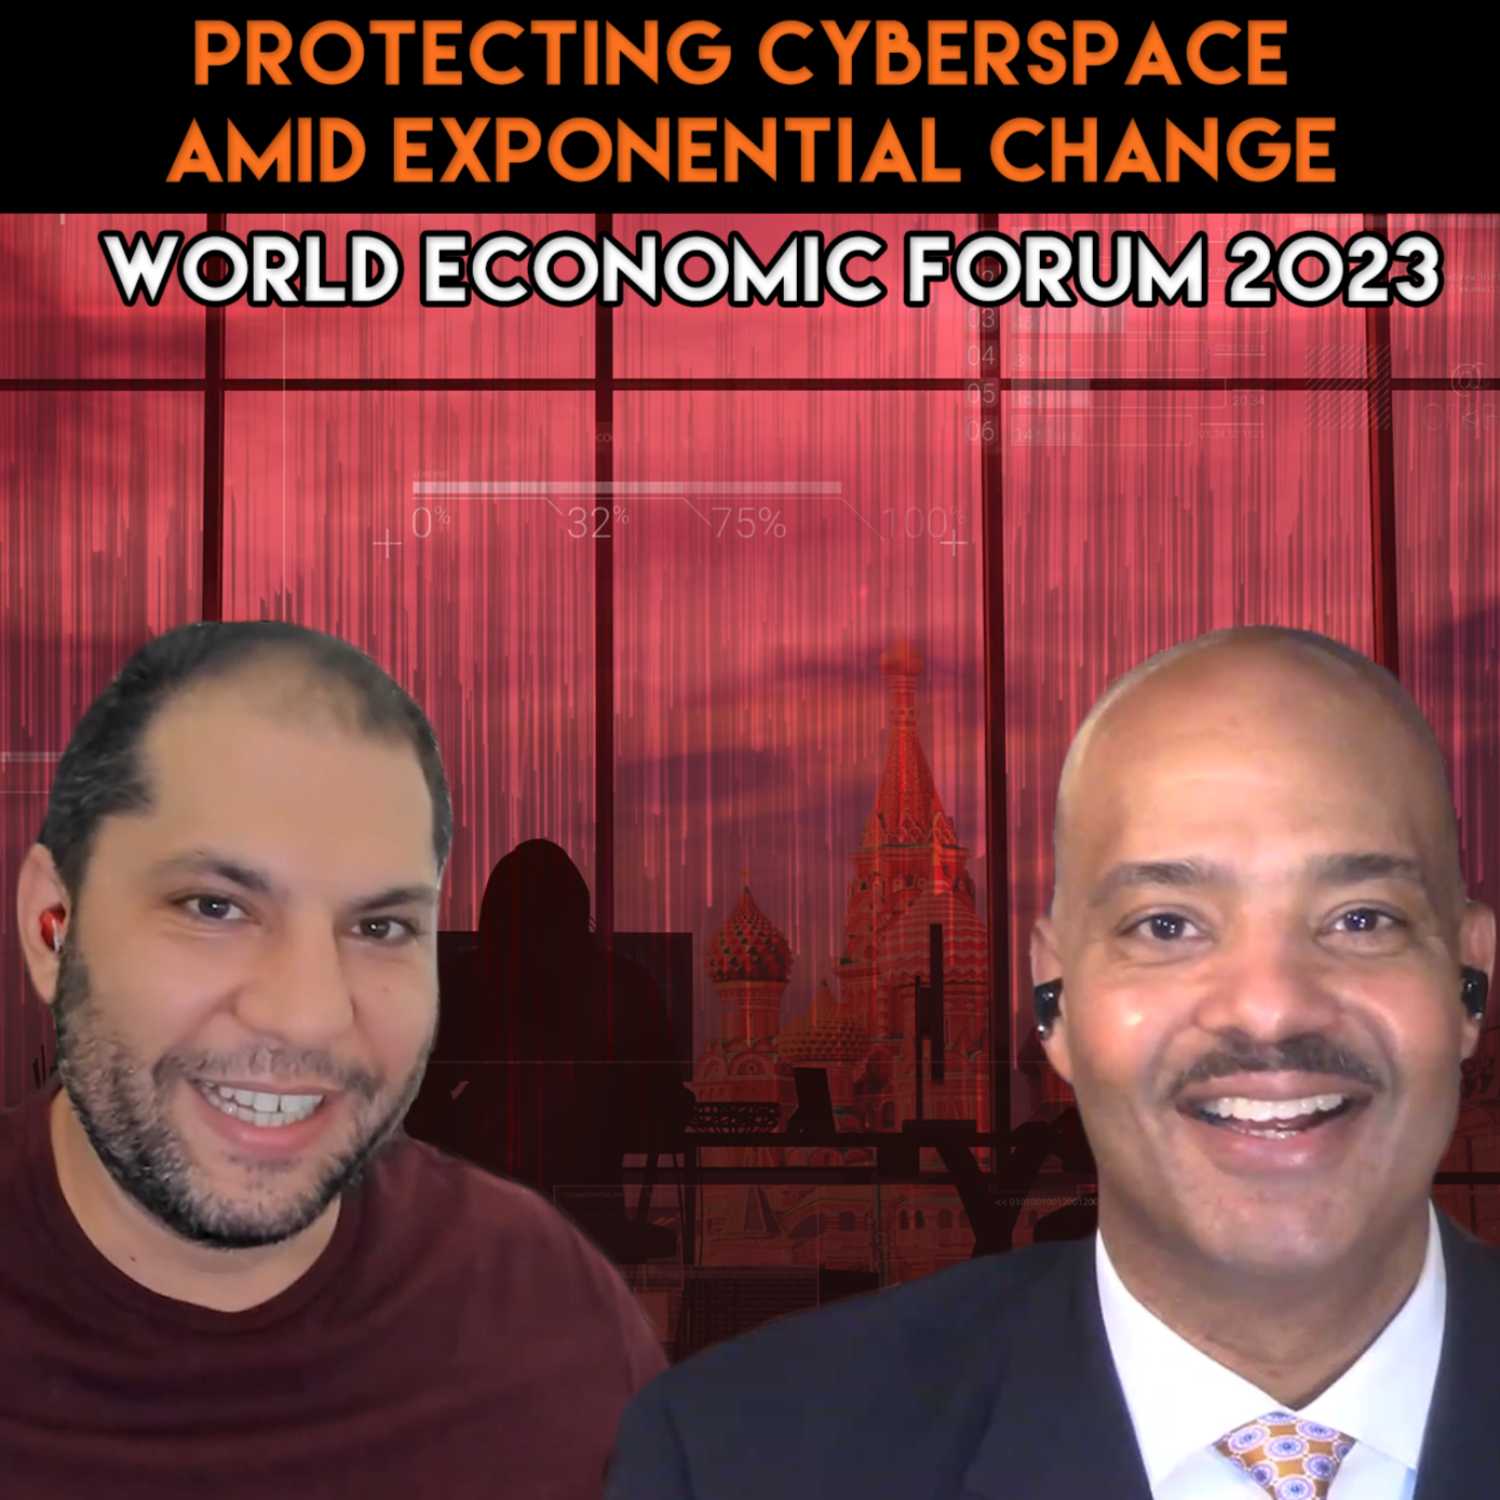 Protecting Cyberspace Amid Exponential Change (WEF23)